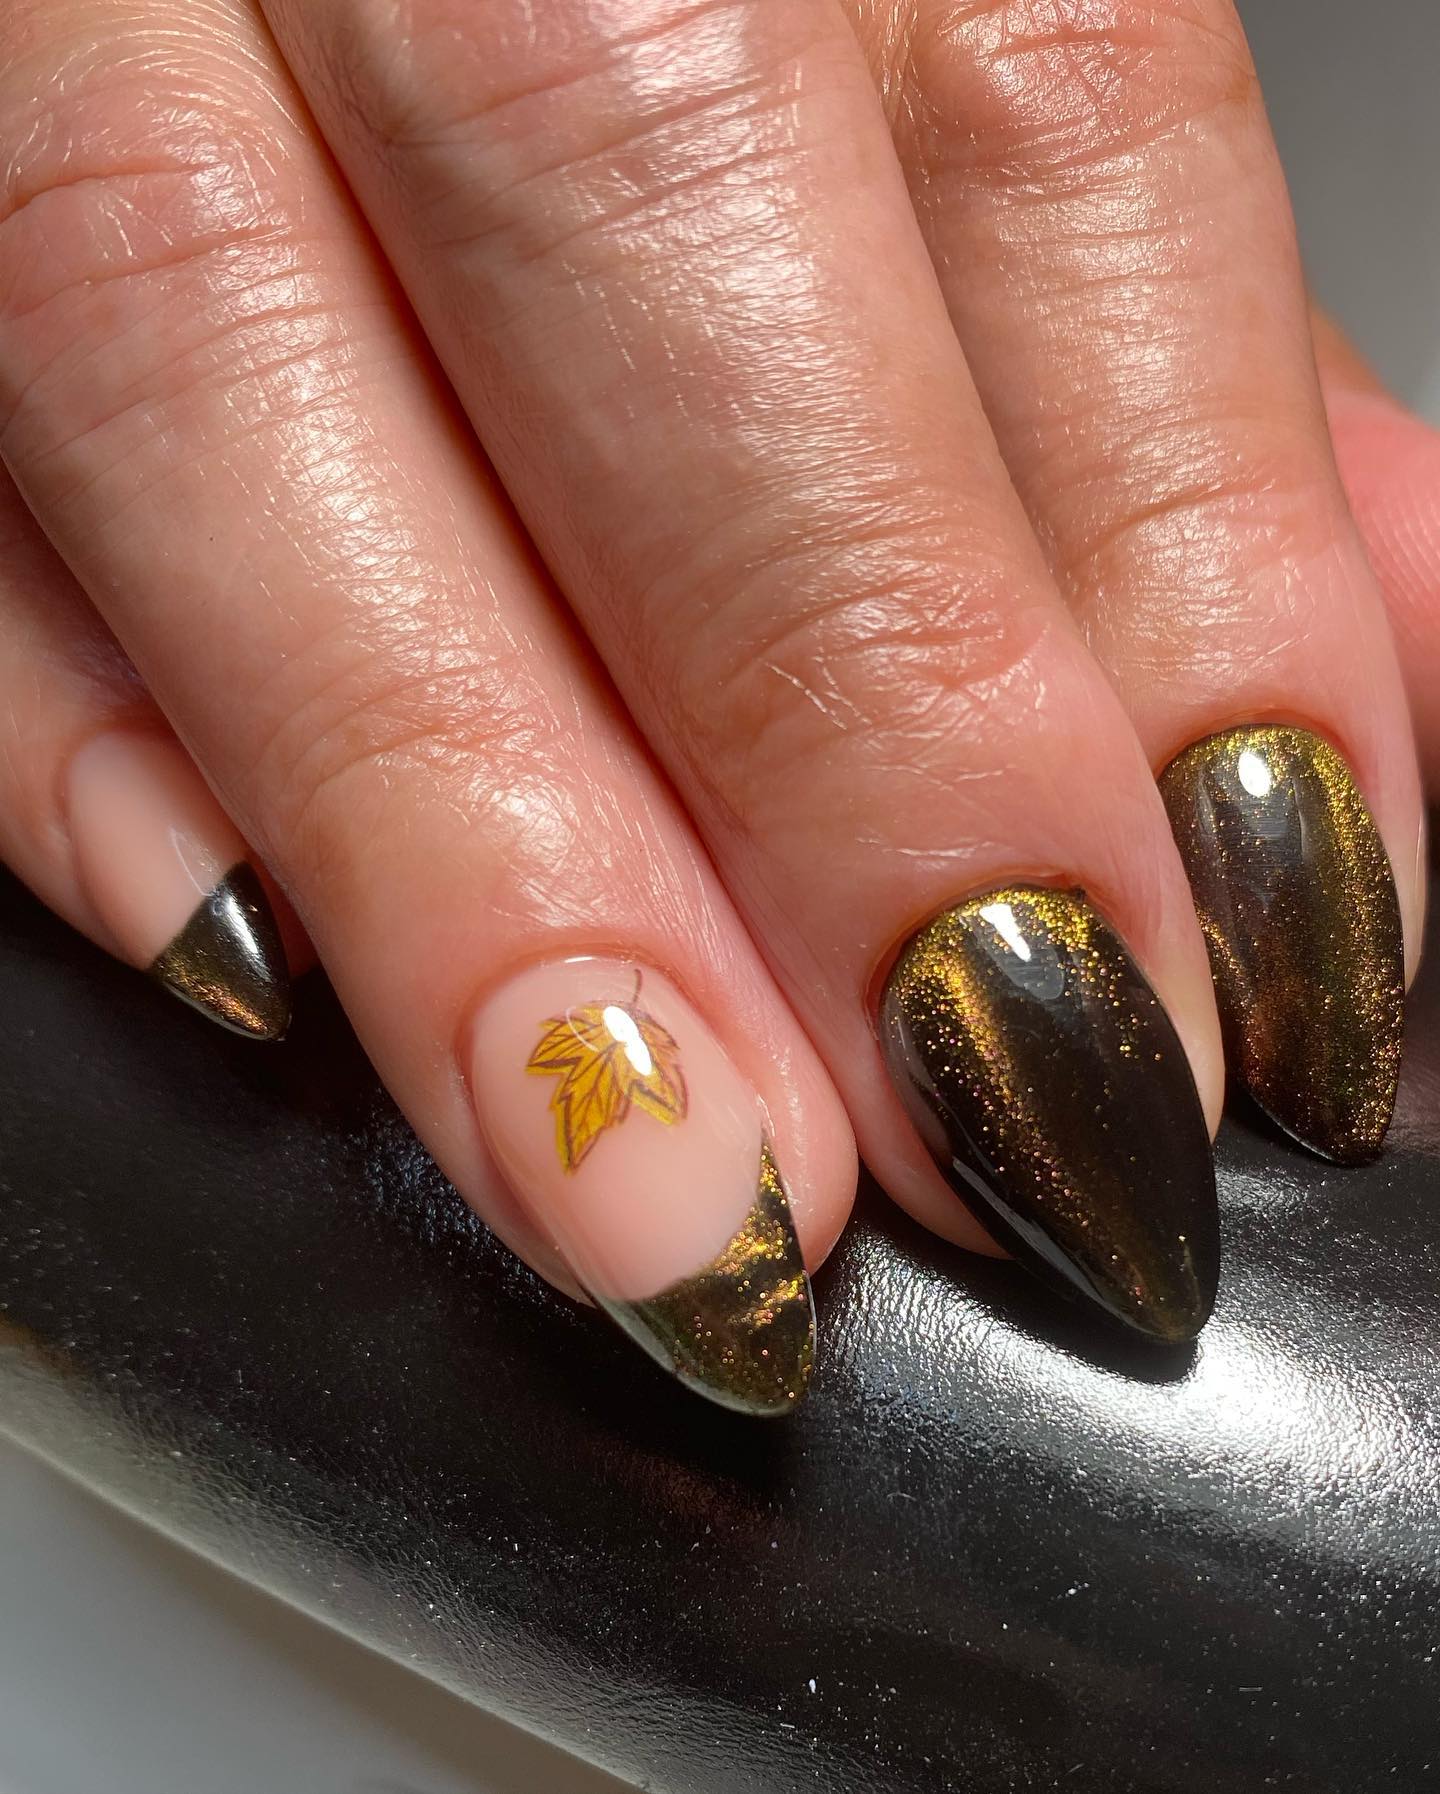  Wanna feel the Autumn vibe on your nails? If your answer is yes, go for this yellowish cat eye nails. For your accent nail, you can have a falling leaf nail art.